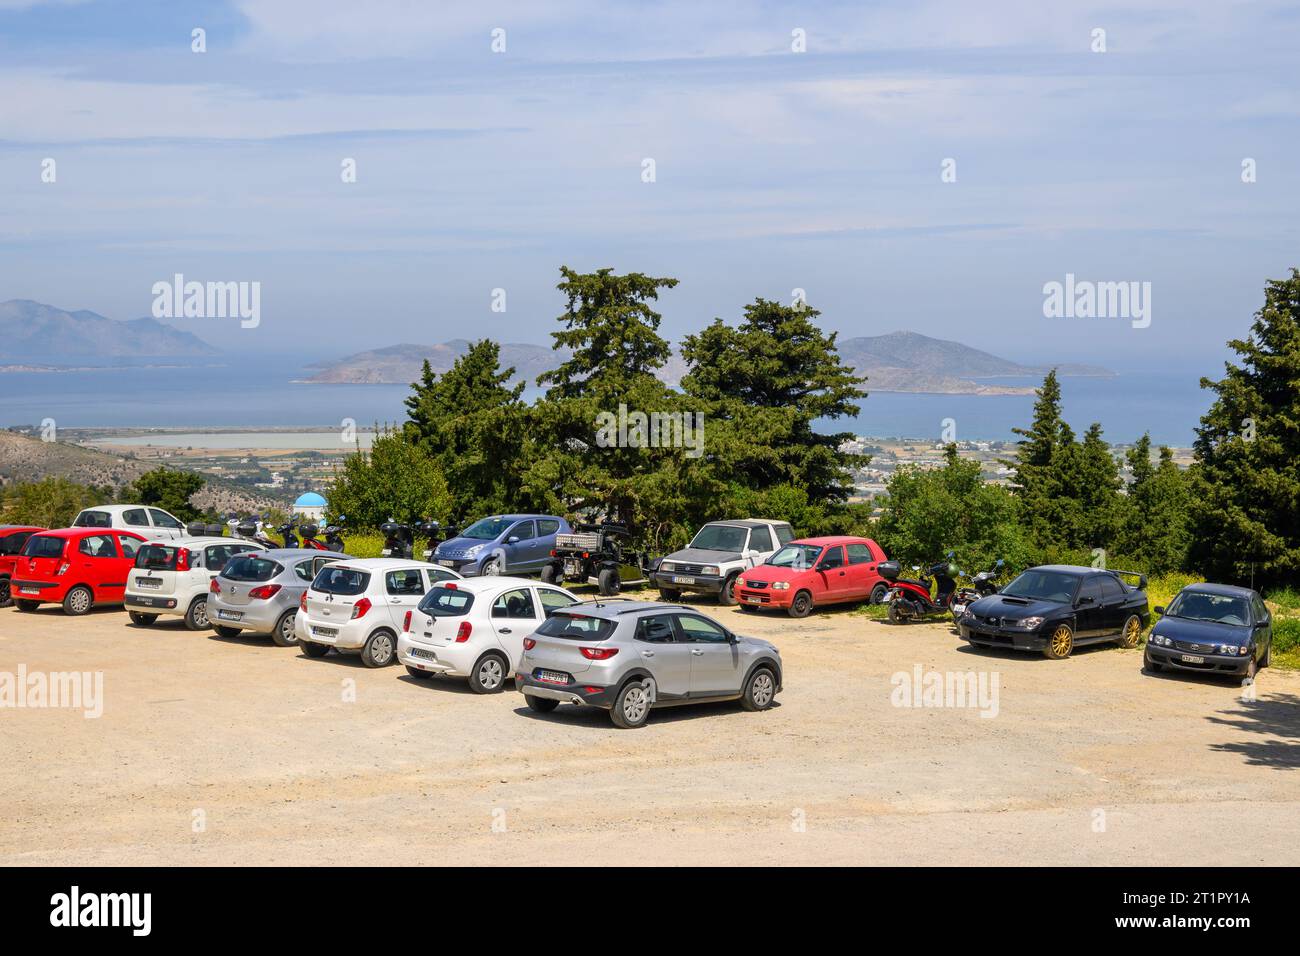 Kos, Greece - May 9, 2023: A parking spot next to the Zia village on the island of Kos. Greece Stock Photo